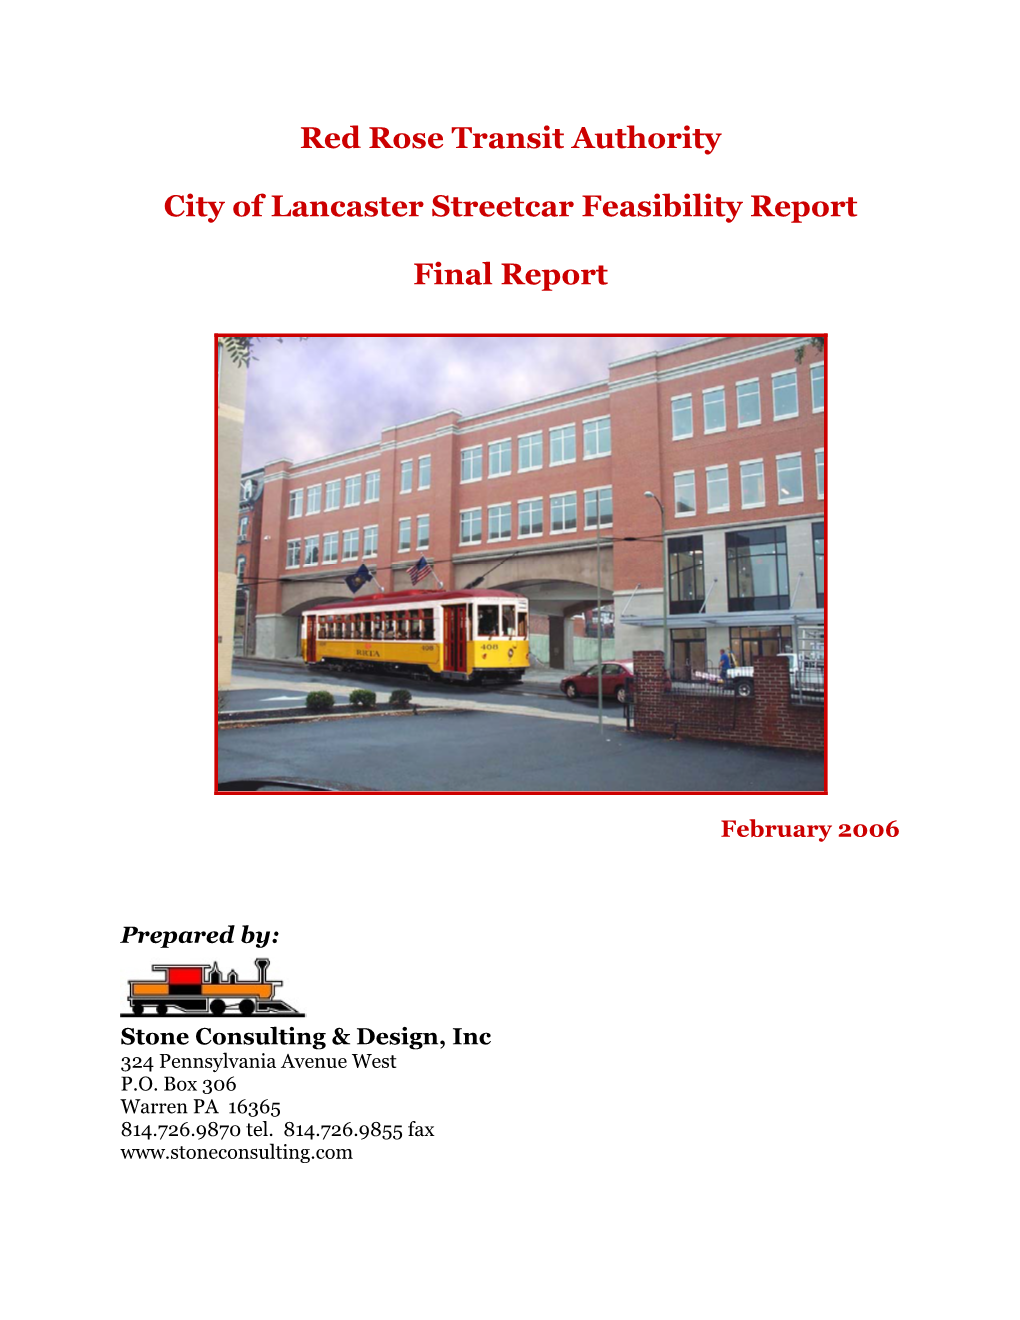 Red Rose Transit Authority City of Lancaster Streetcar Feasibility Report Final Report - February 2006